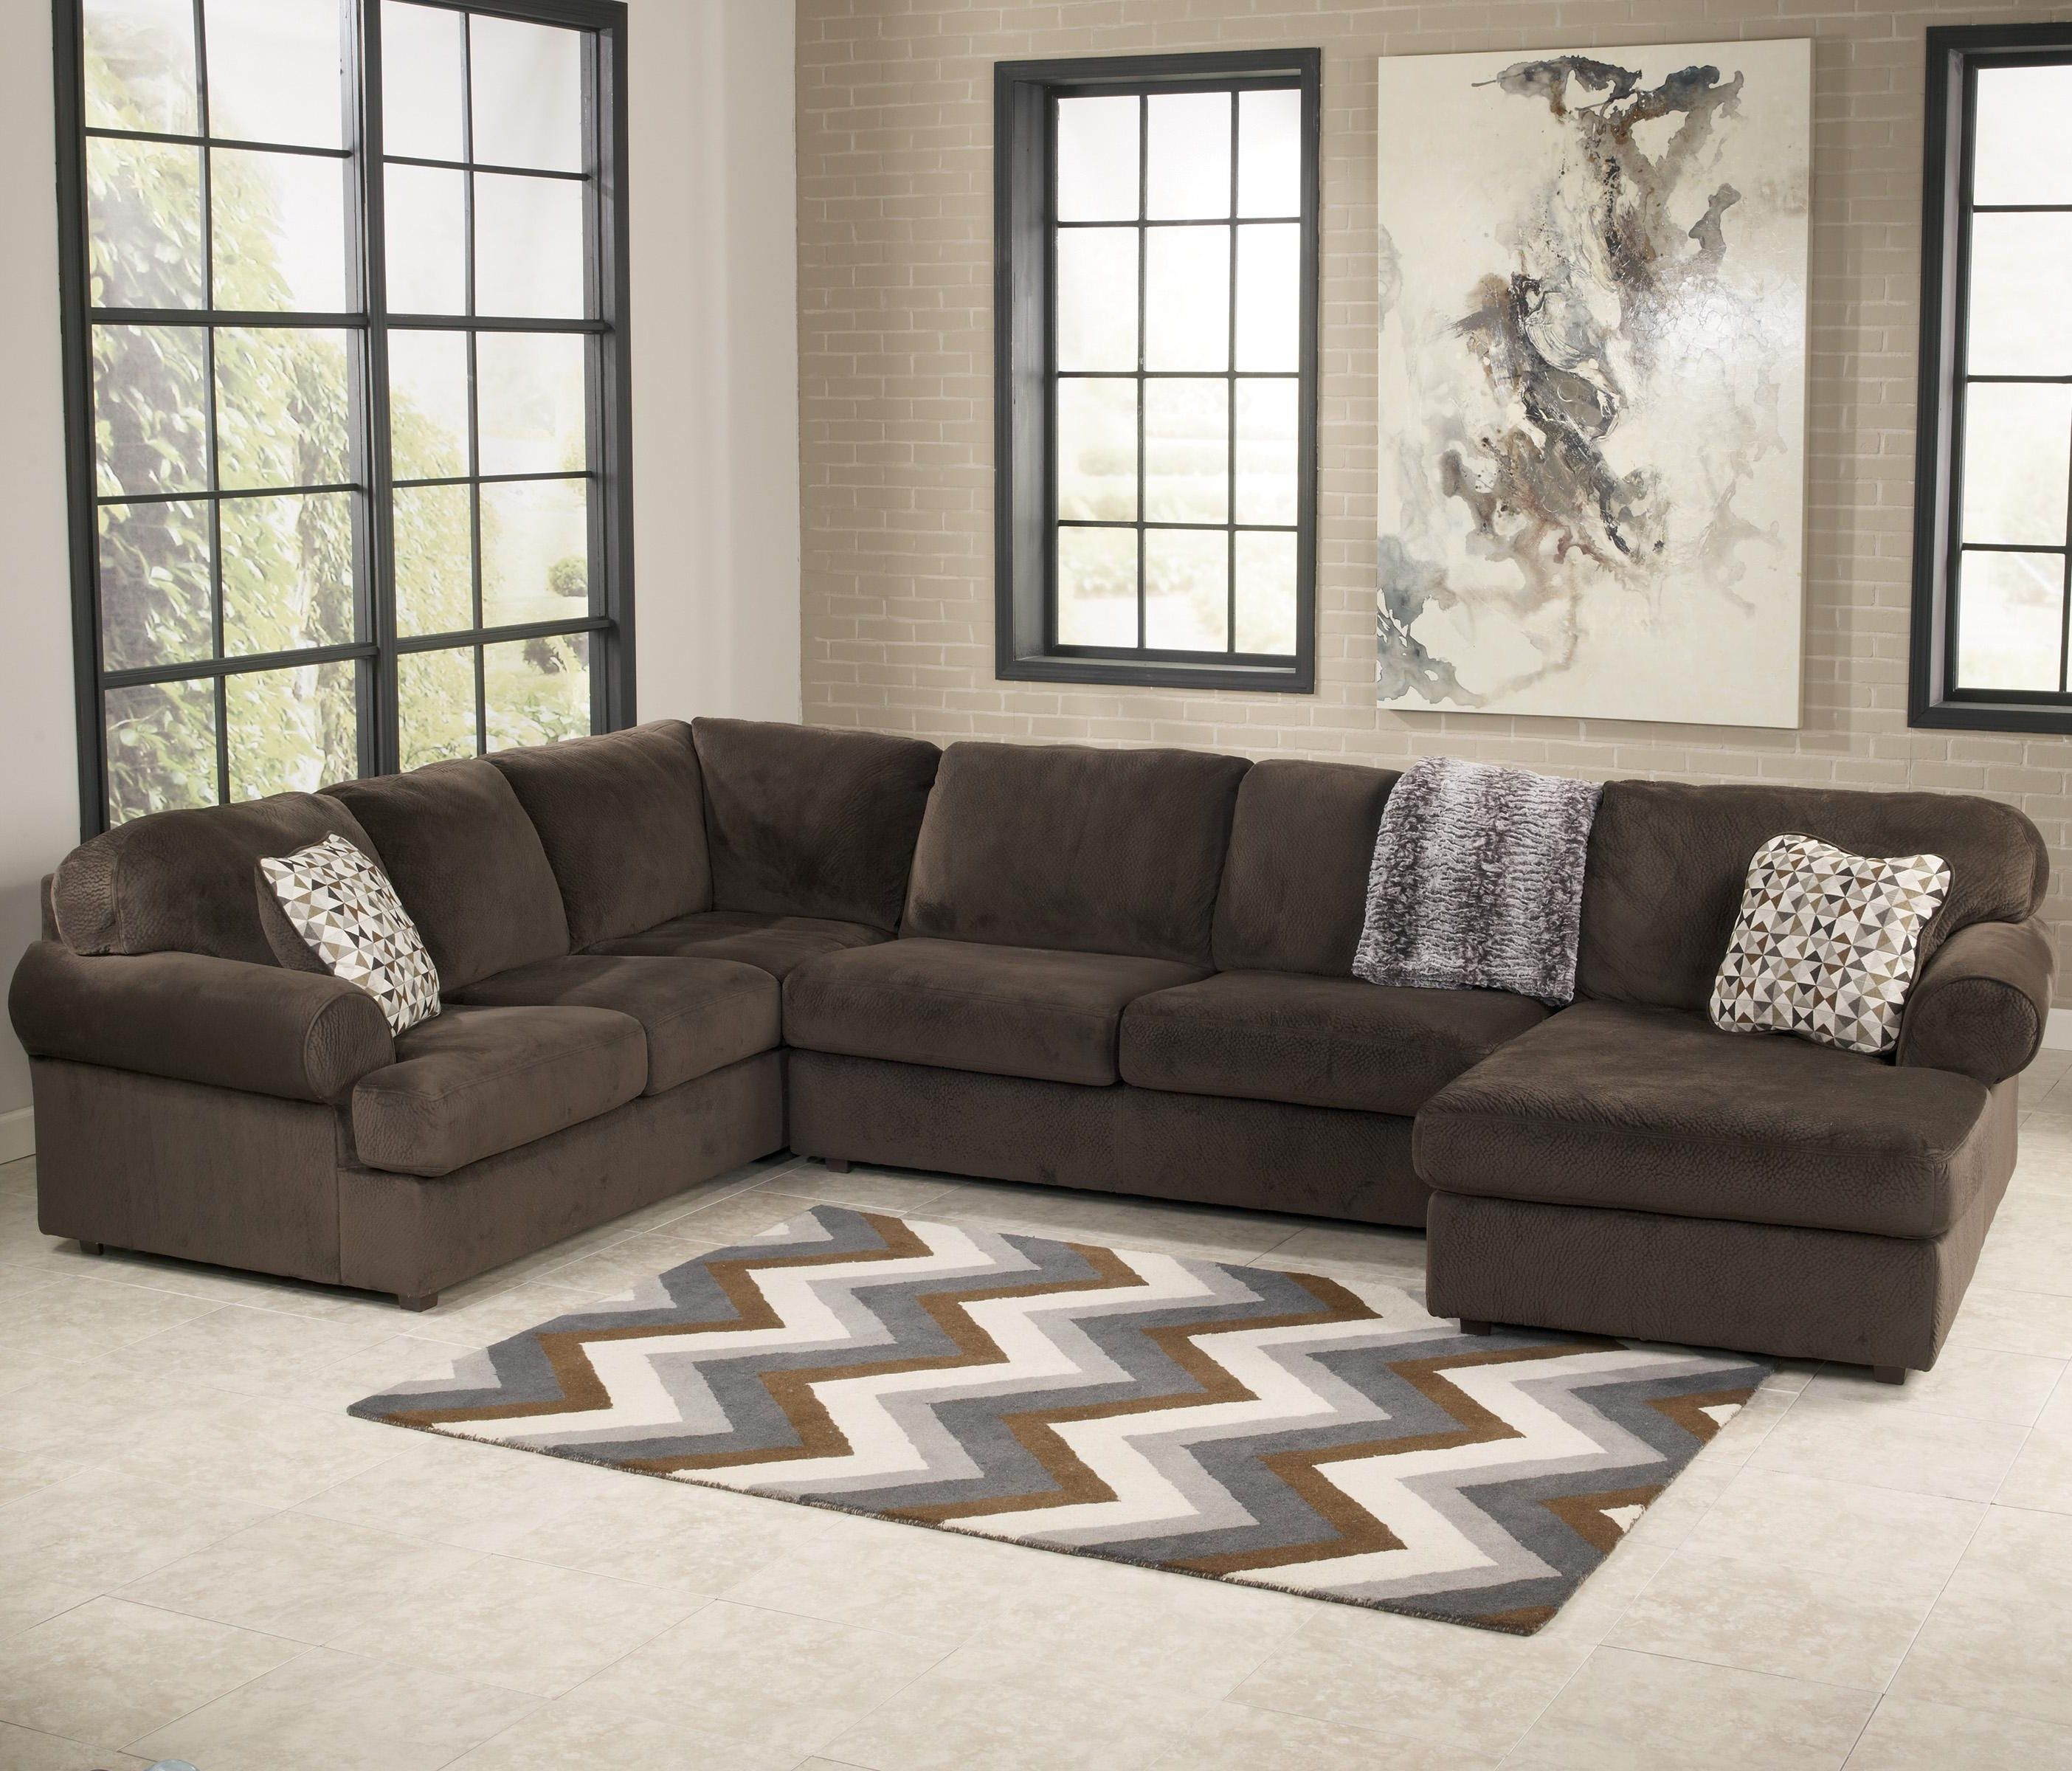 Signature Designashley Jessa Place – Chocolate Casual Within Widely Used Green Bay Wi Sectional Sofas (View 1 of 20)